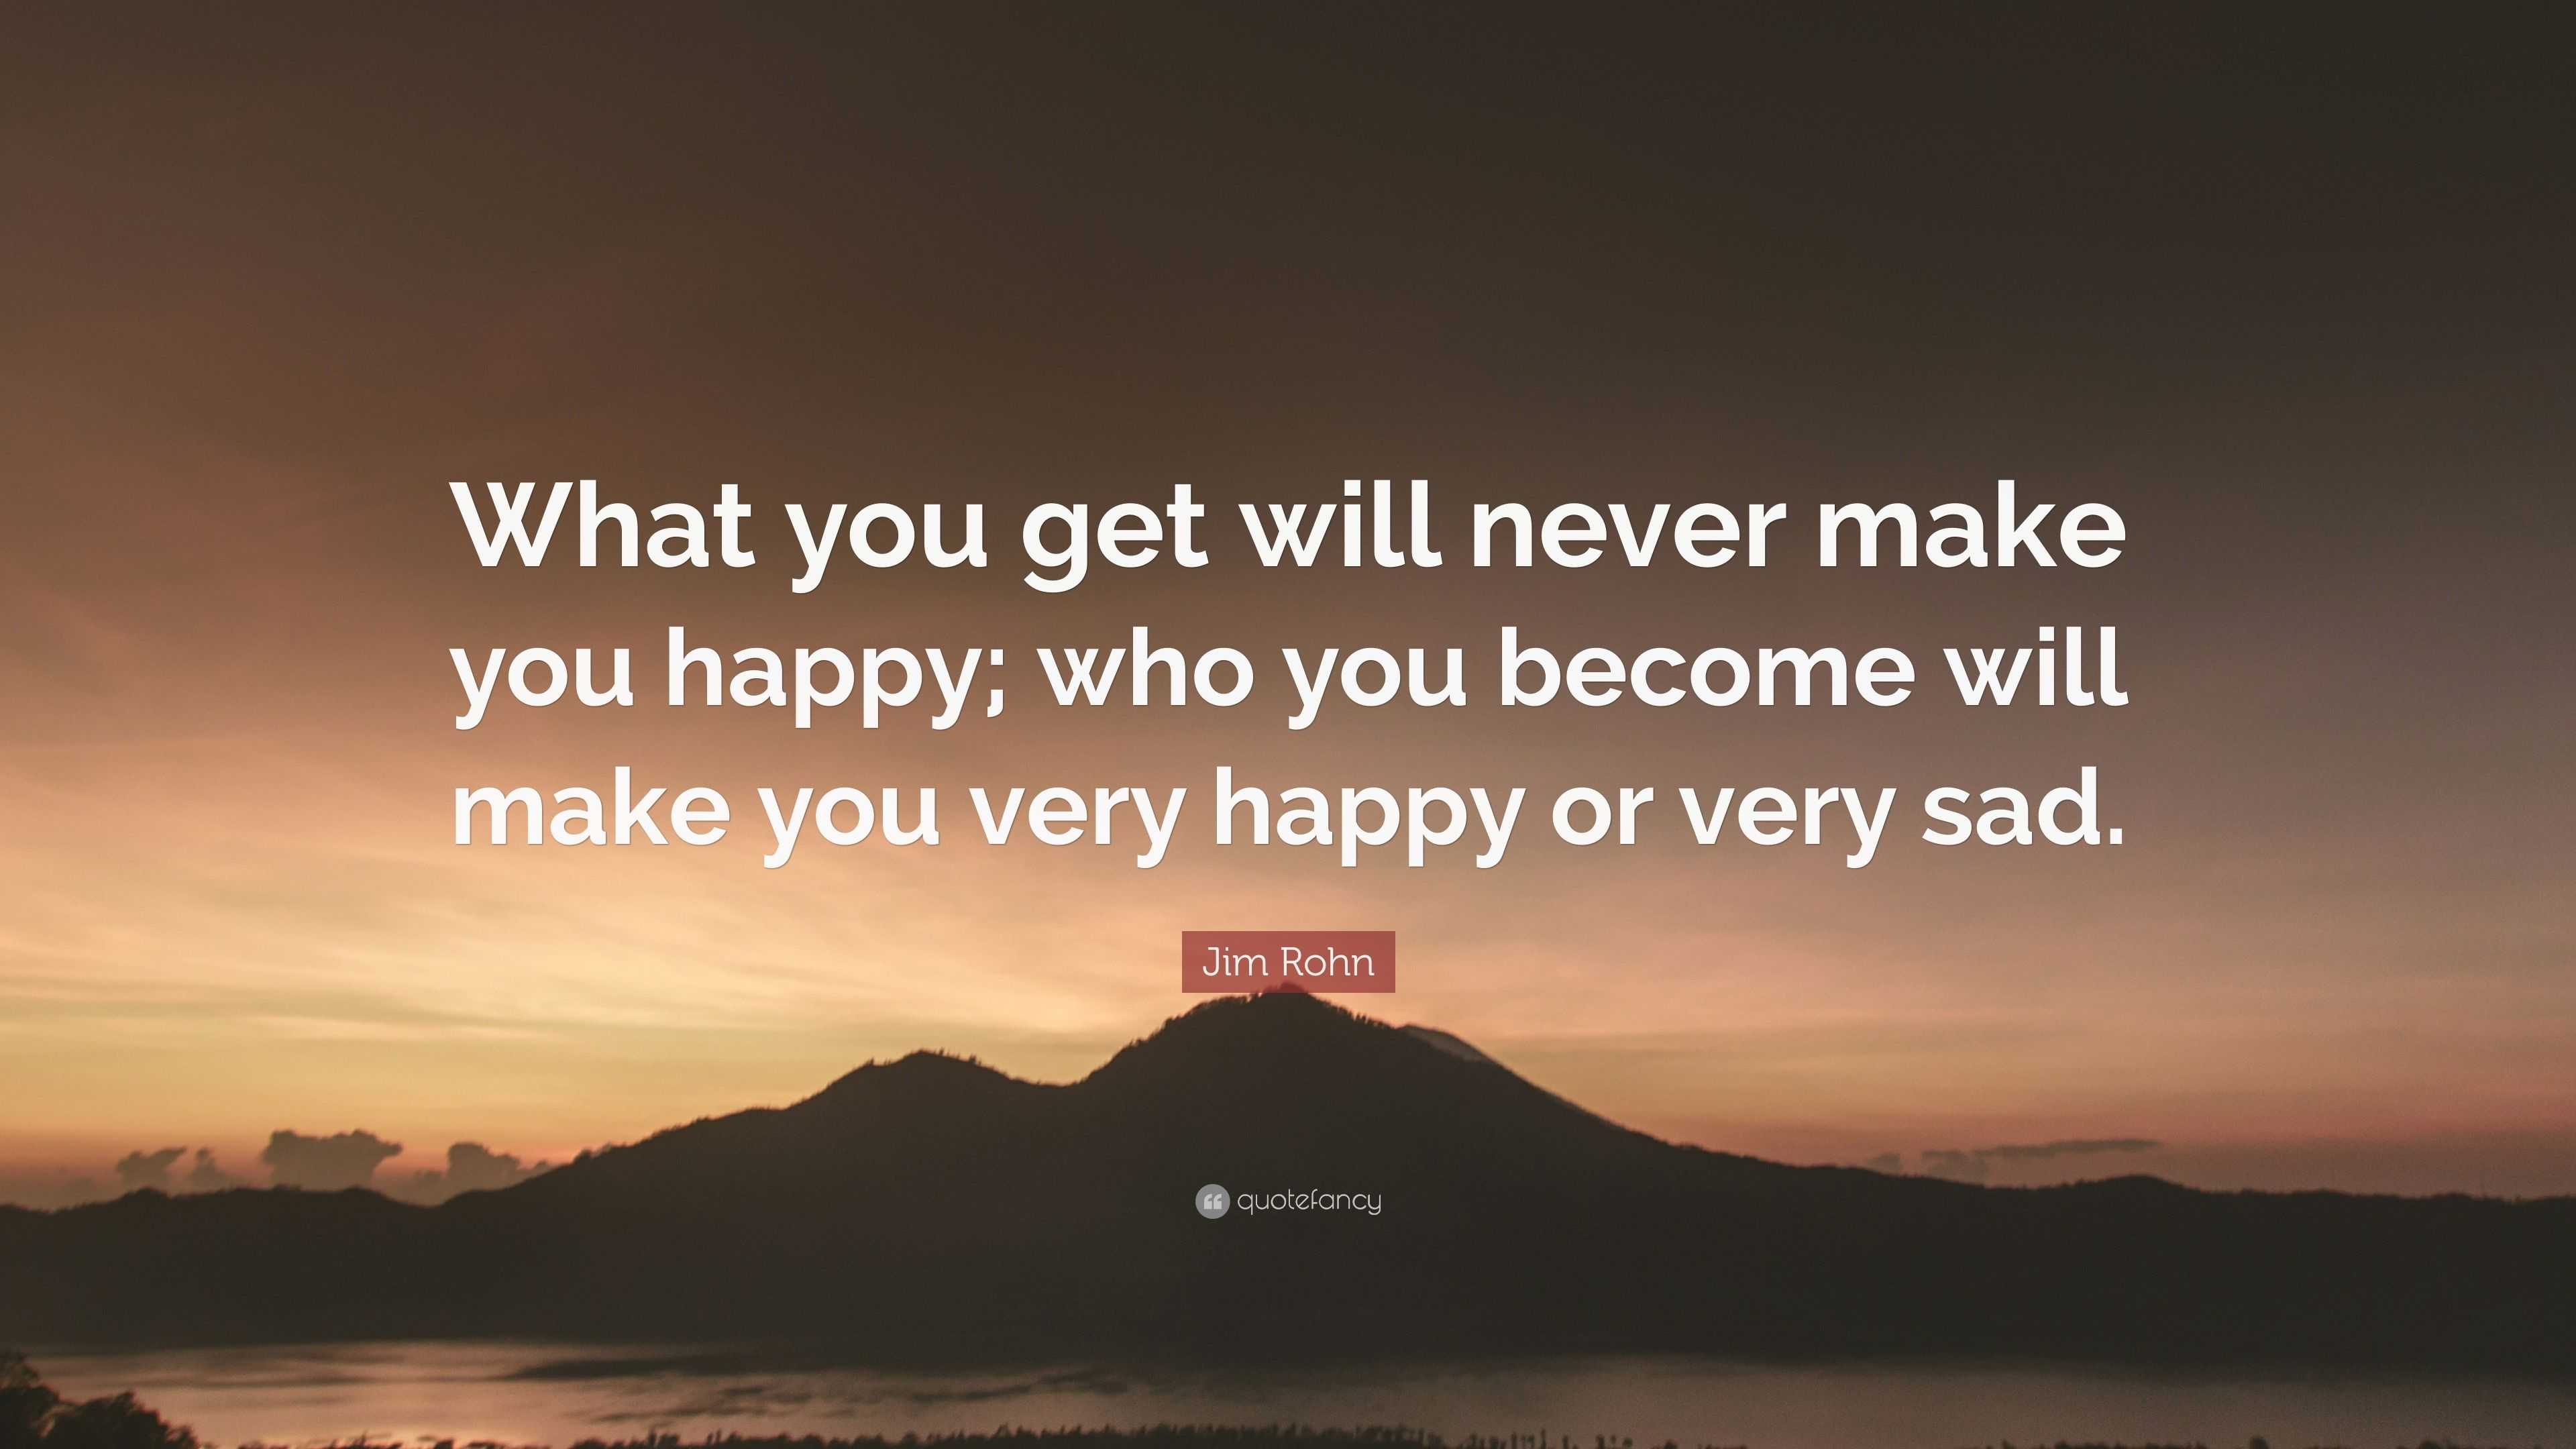 Jim Rohn Quote: “What you get will never make you happy; who you become ...